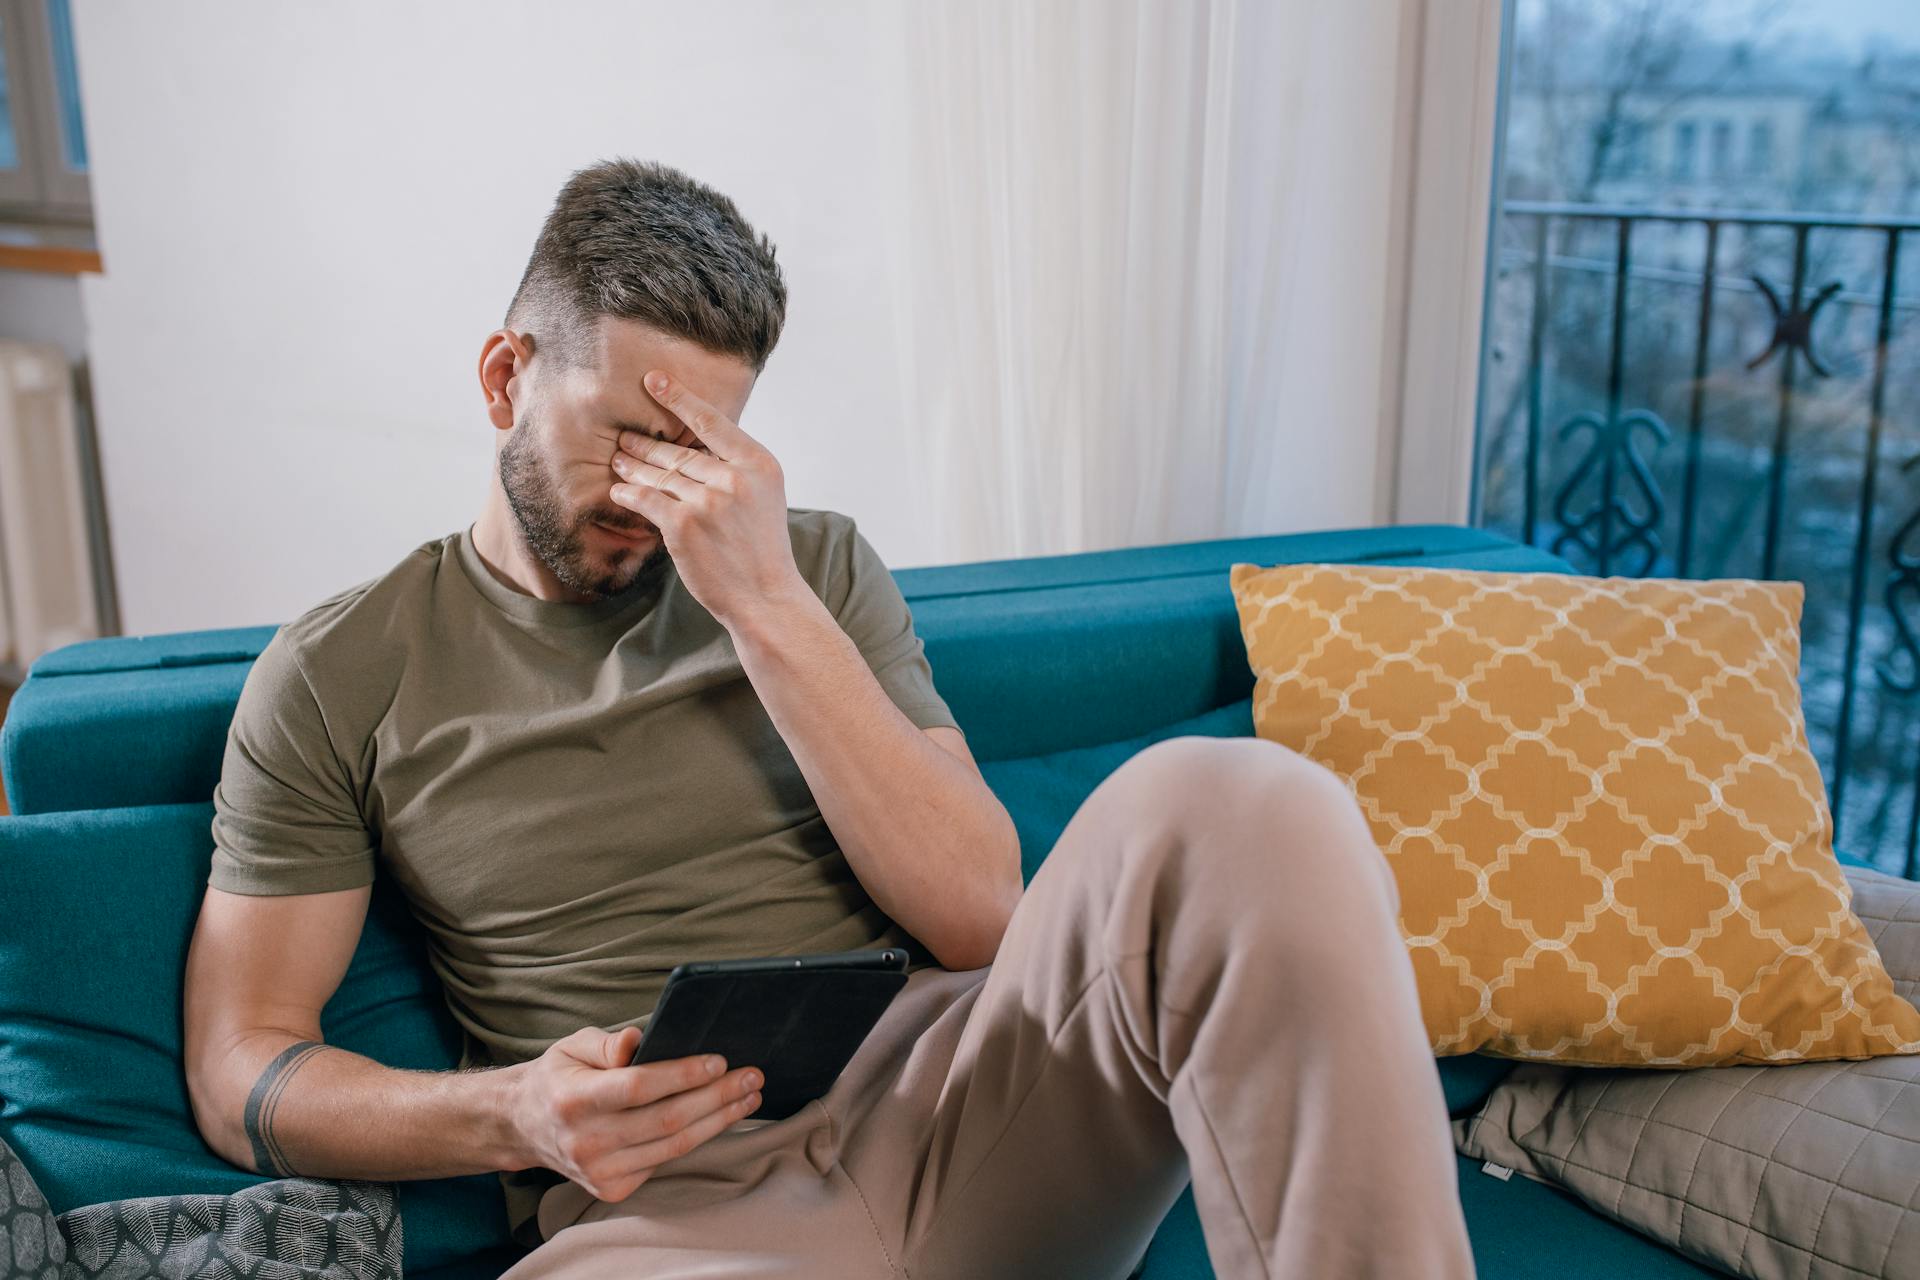 A man crying on his sofa | Source: Pexels